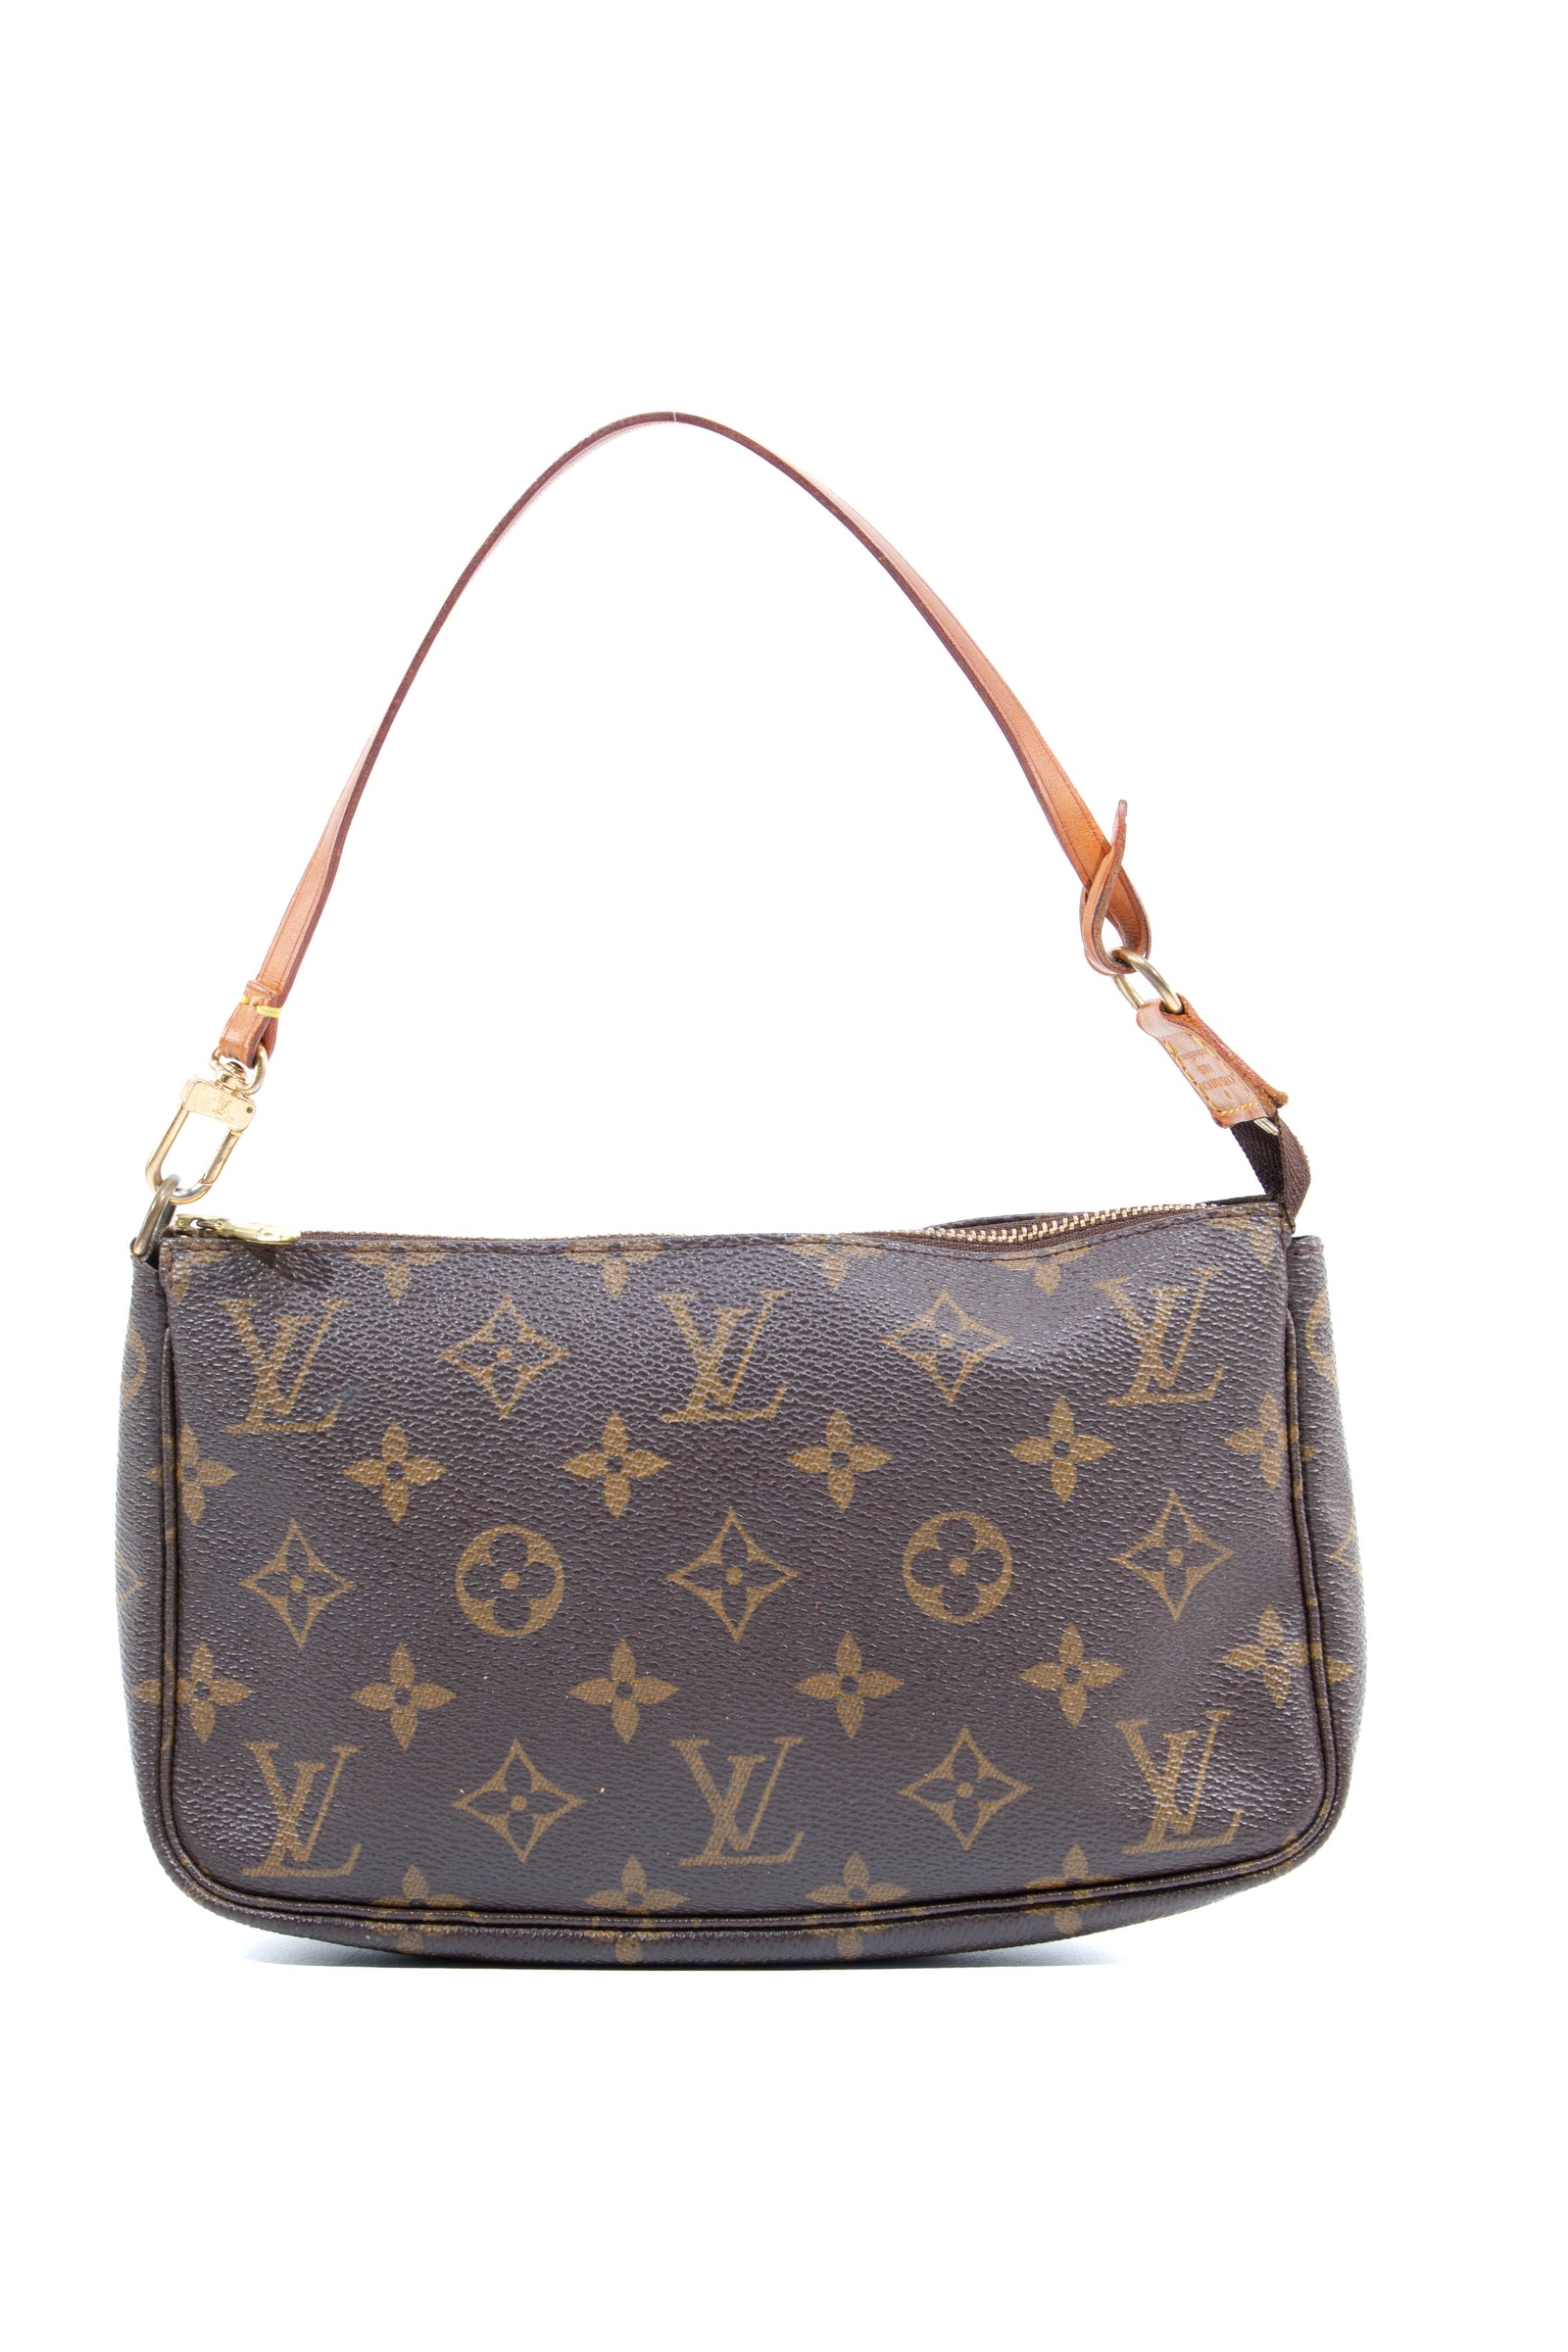 Louis Vuitton Mini Alma Chain Bag Reference Guide - Spotted Fashion